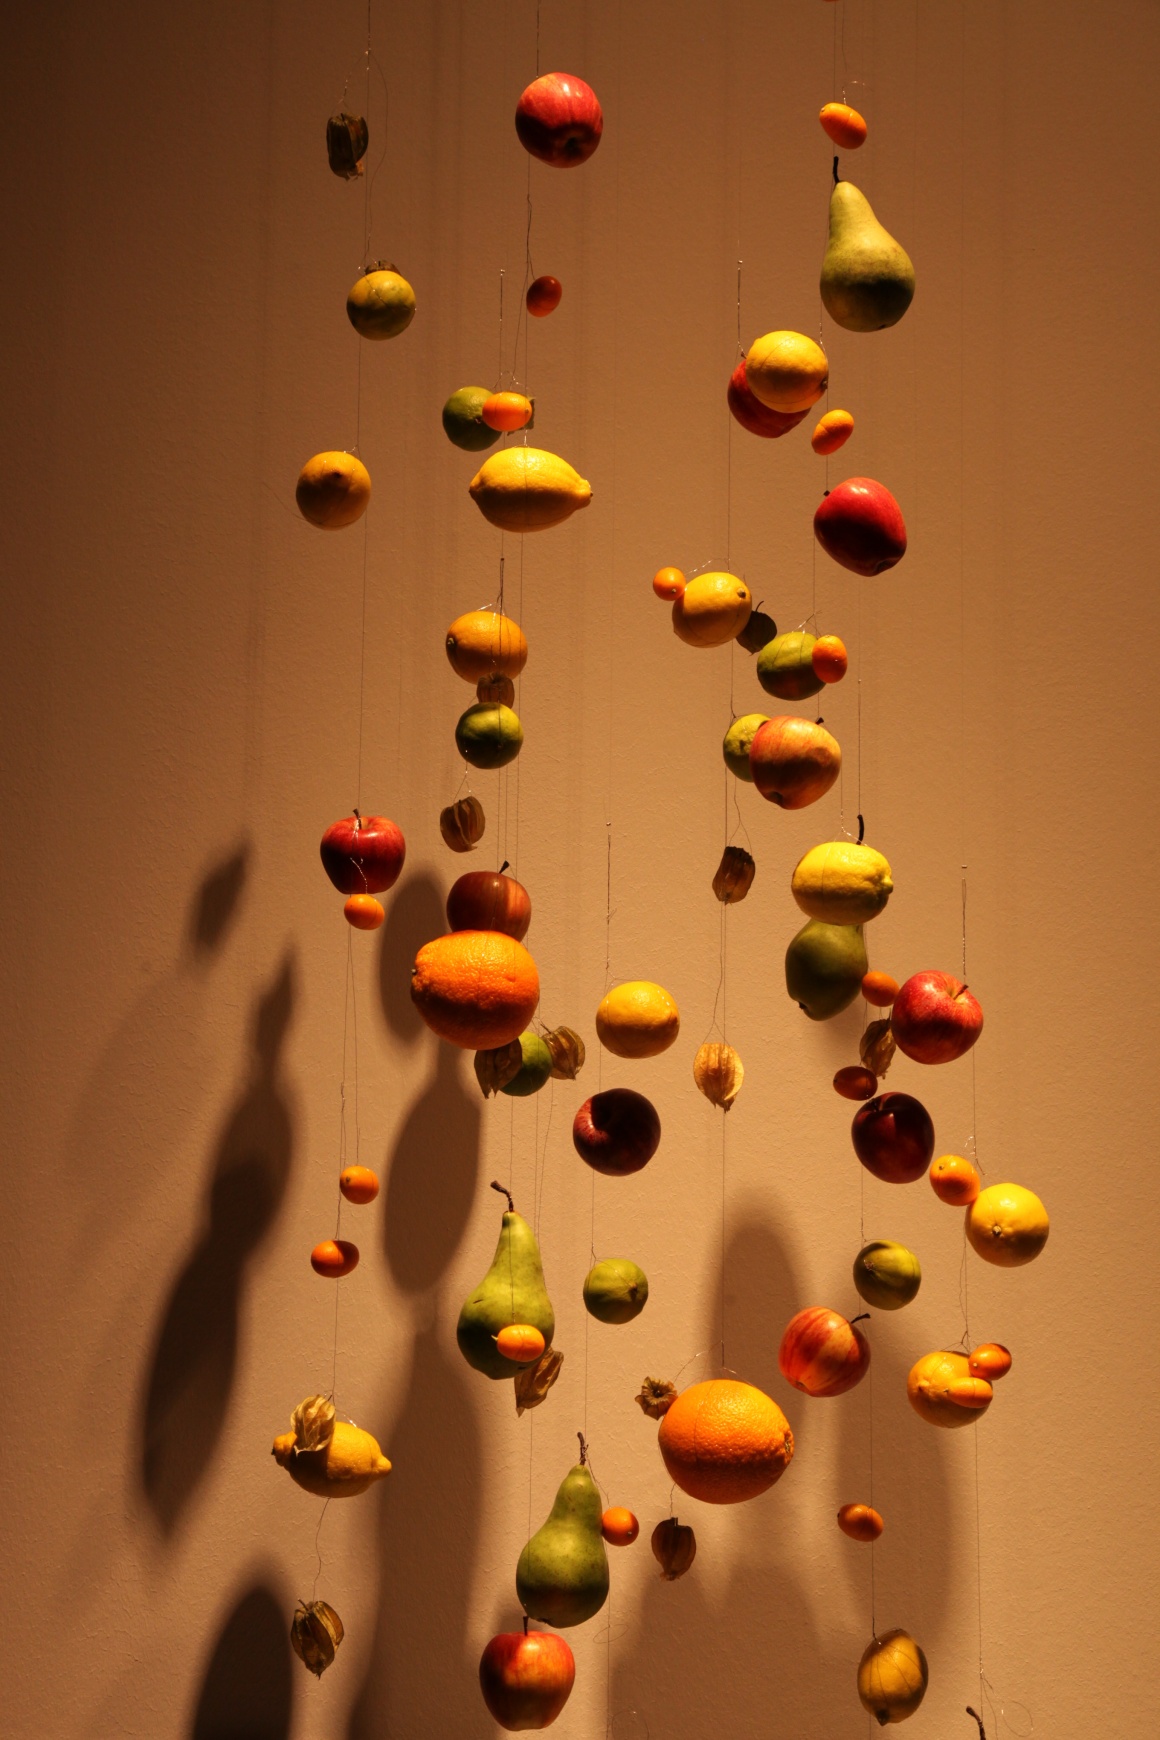 Fruit hanging from the roof creating shadows